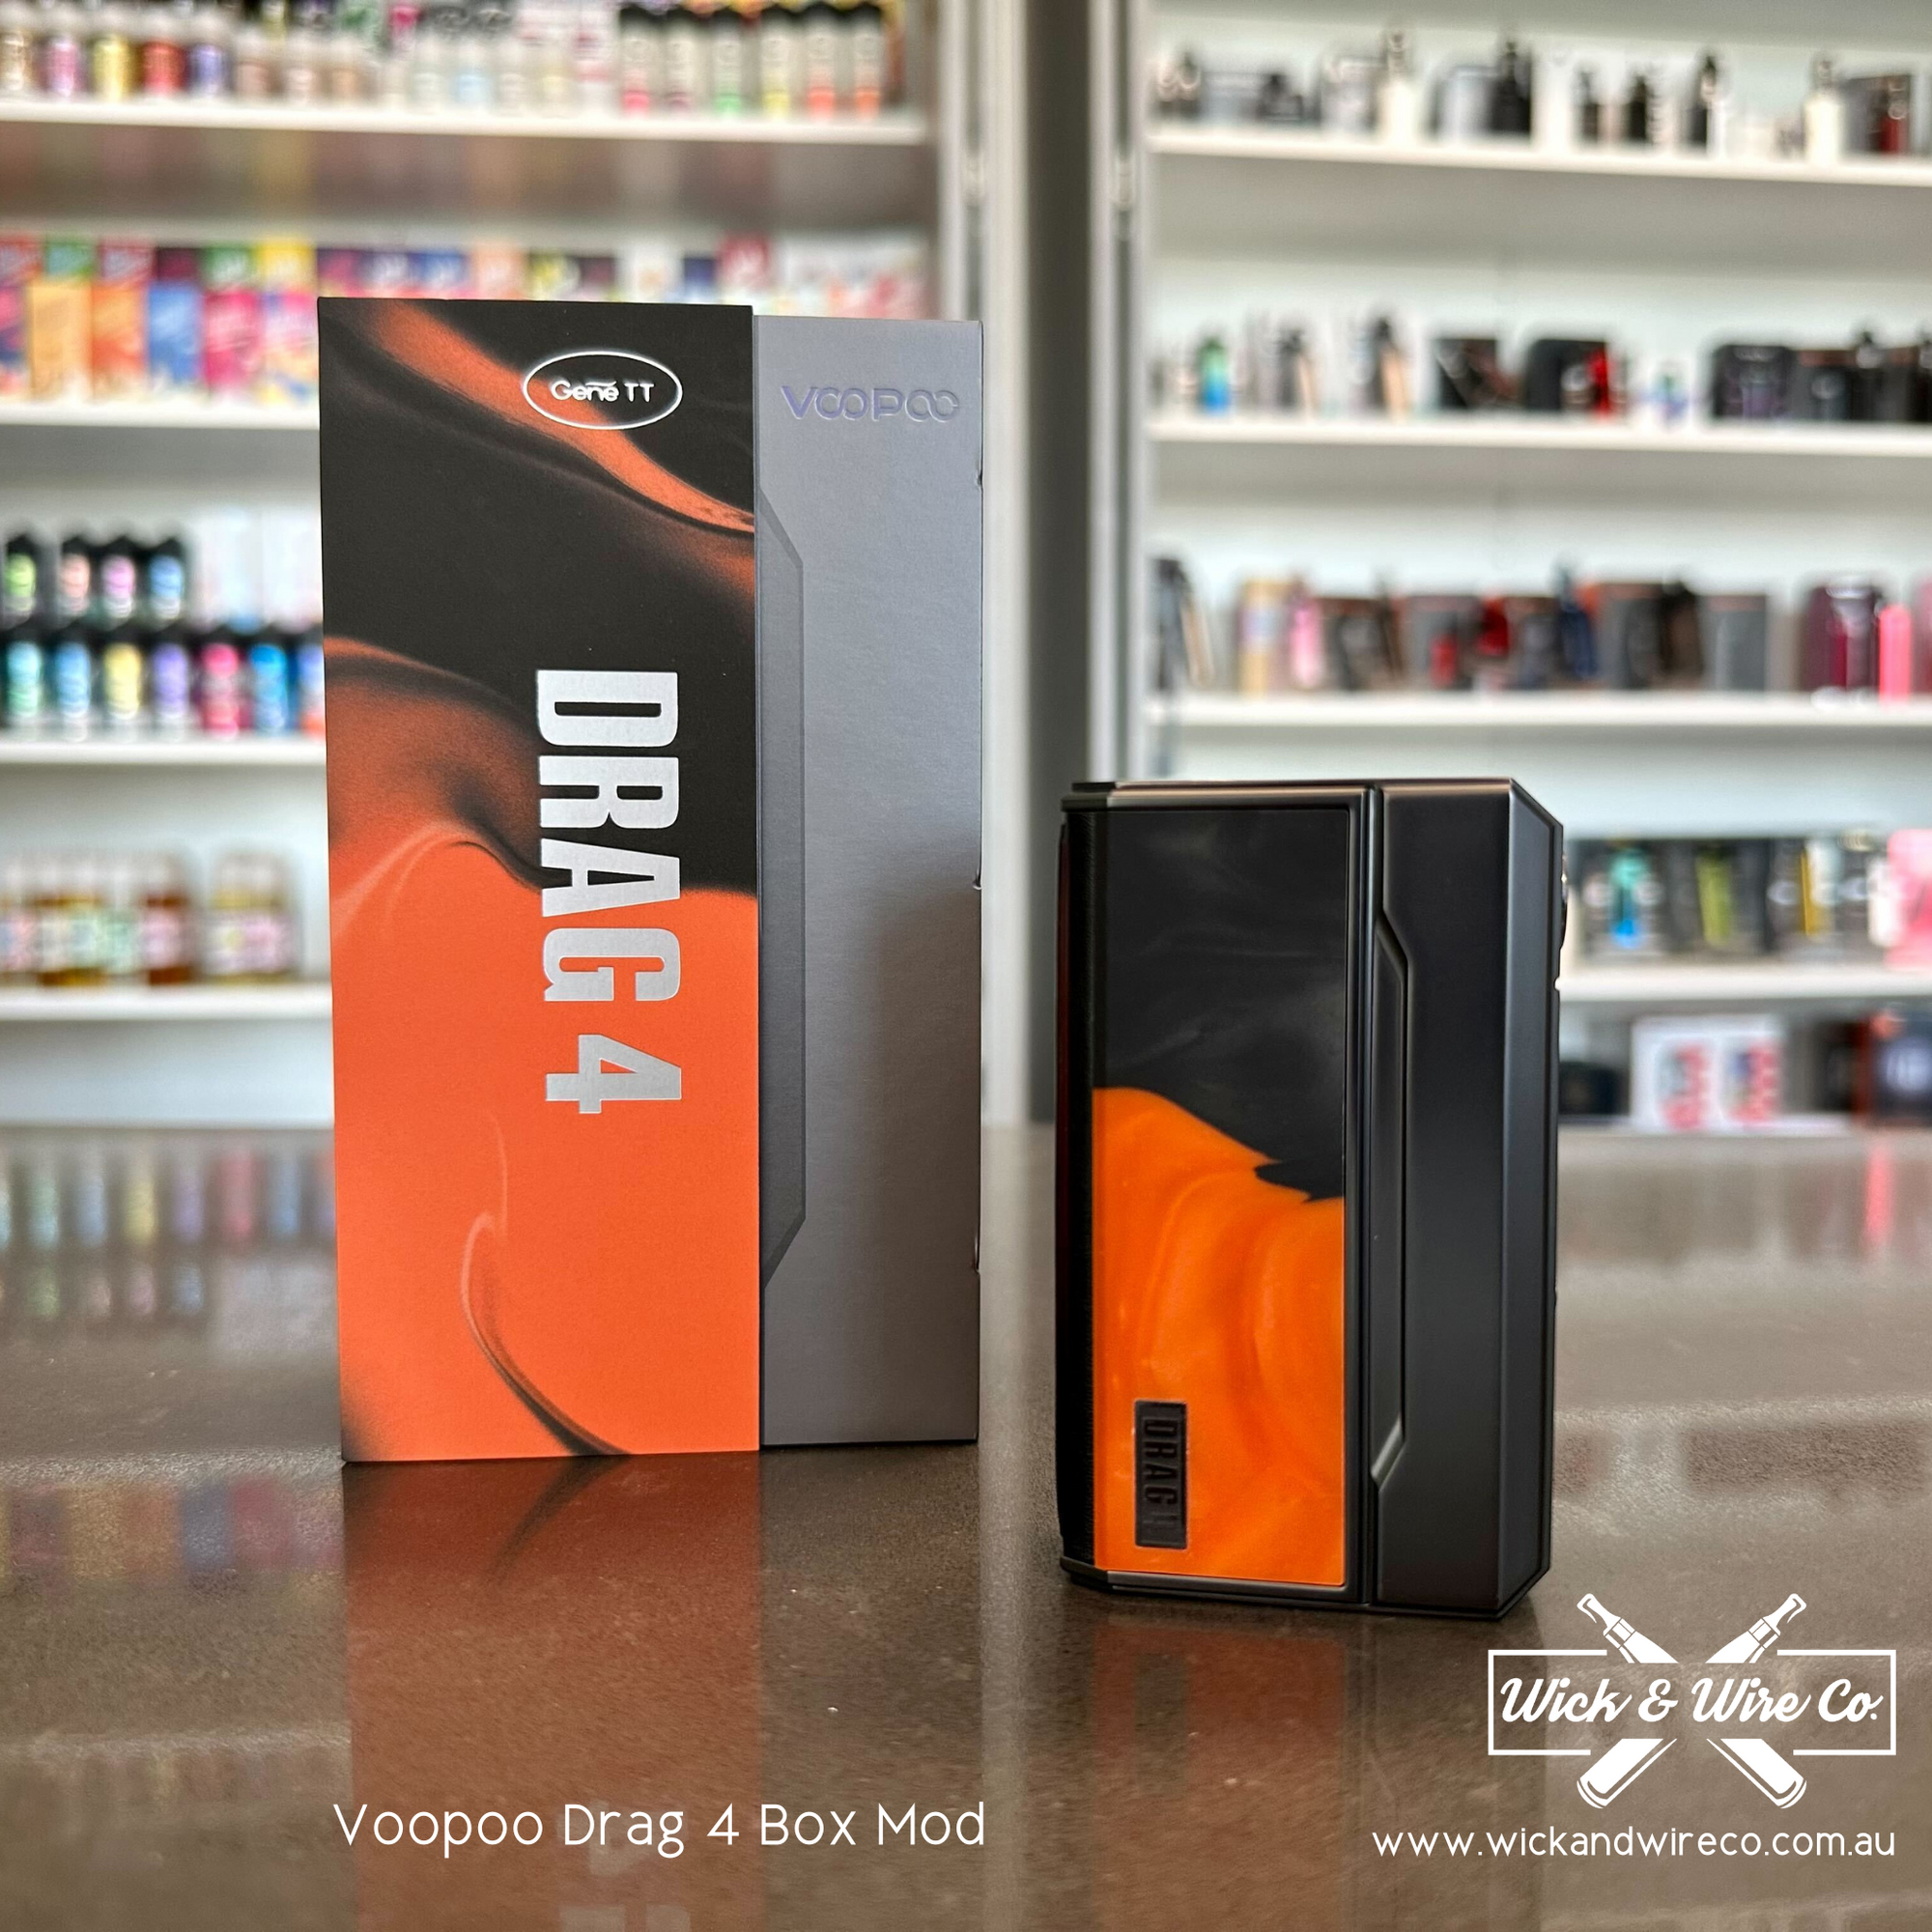 Buy Drag 4 Box Mod Only by Voopoo - Wick and Wire Co Melbourne Vape Shop, Victoria Australia